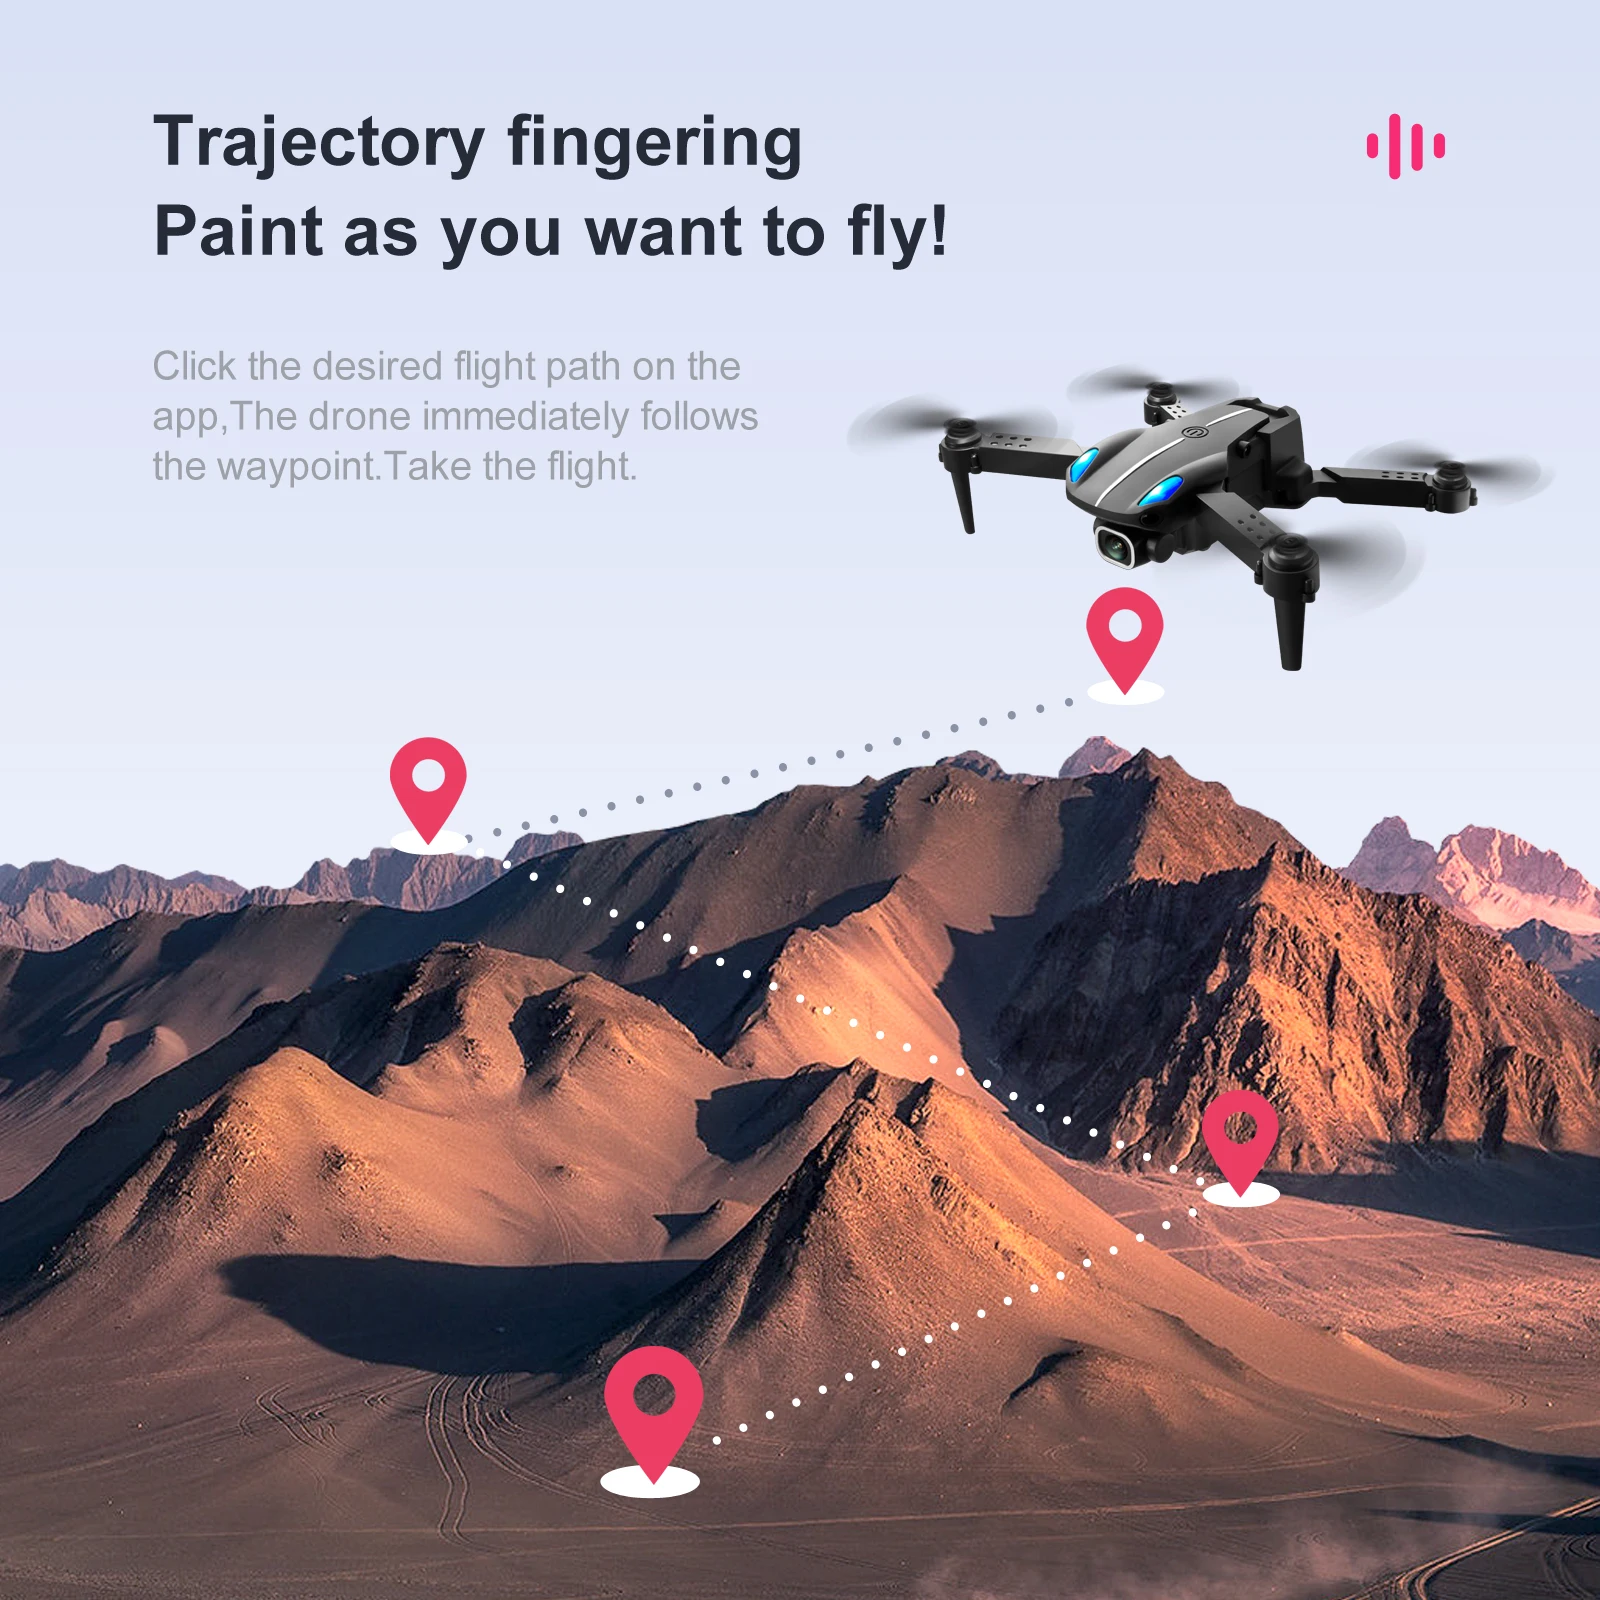 KY907 PRO Drone, drone follows the waypoint take the flight: 0 - 